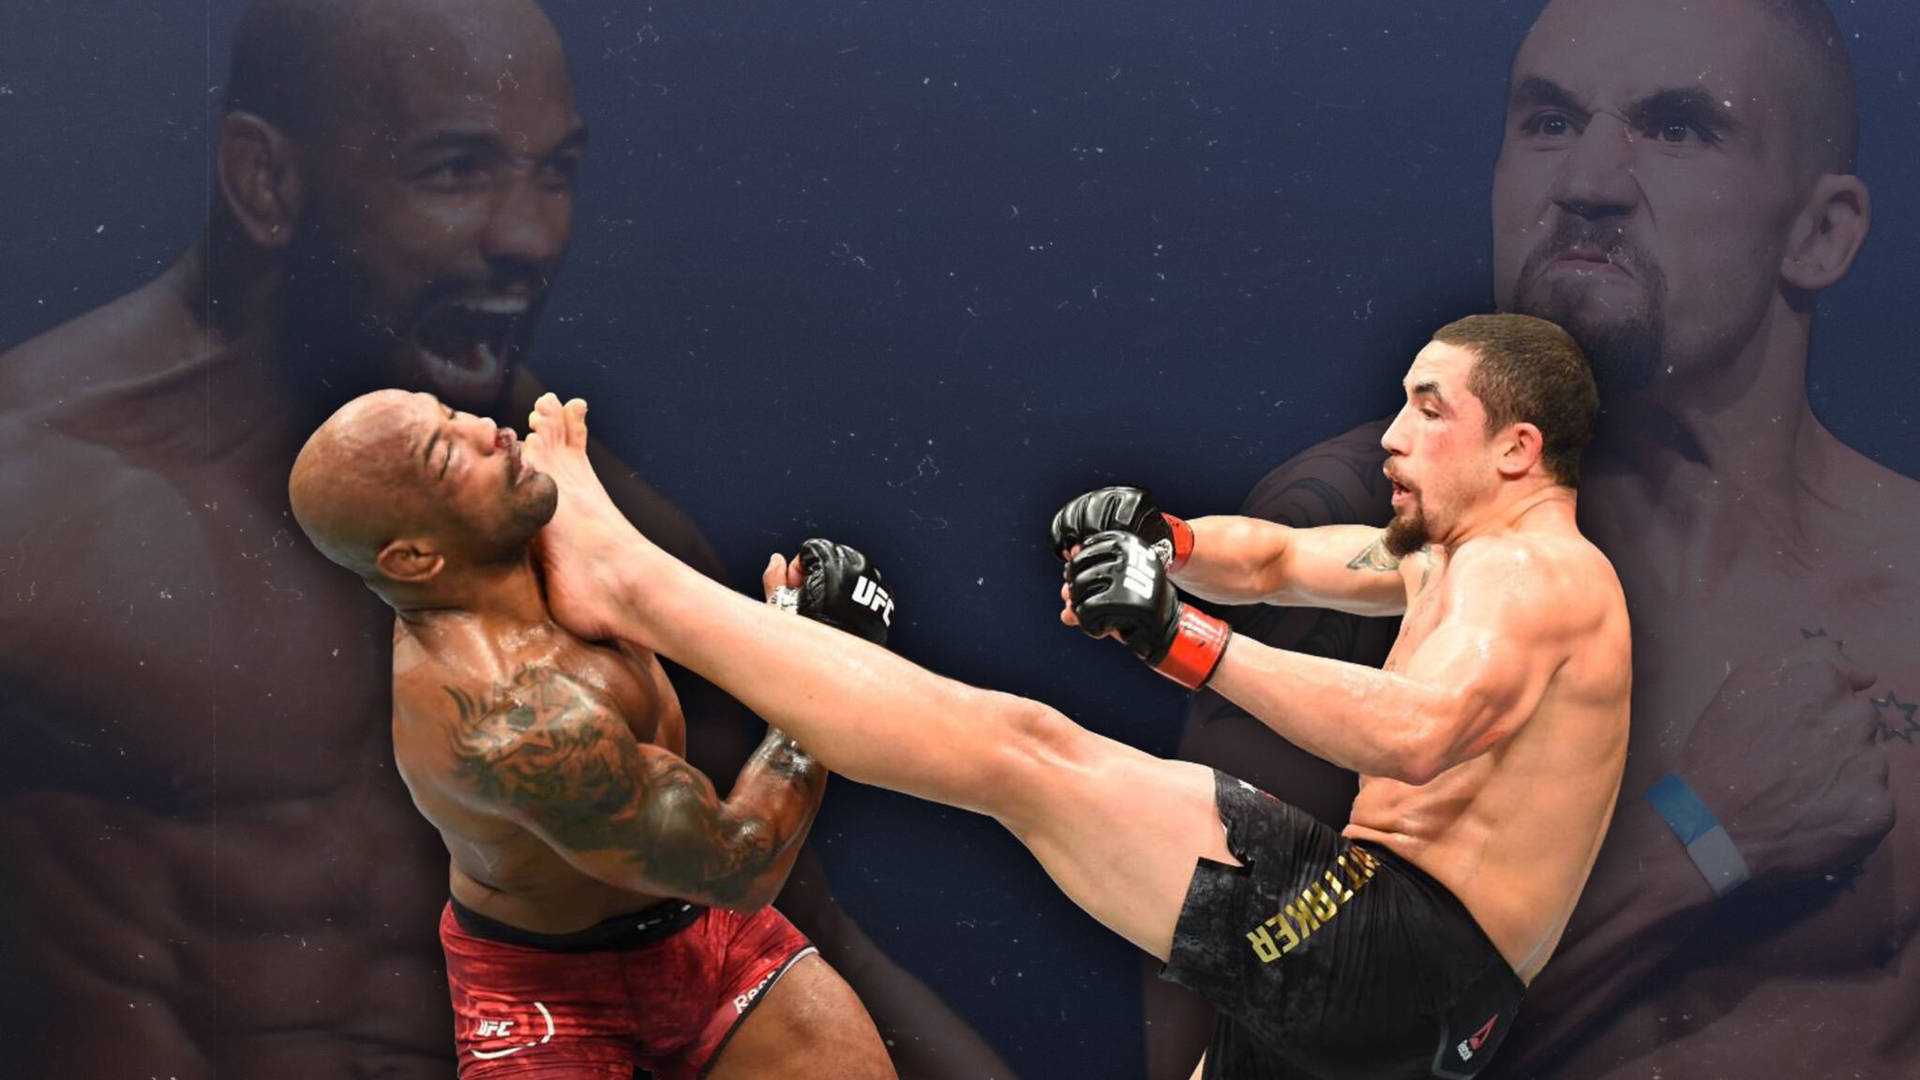 Robert Whittaker delivering a high kick during his fight with Yoel Romero. Wallpaper